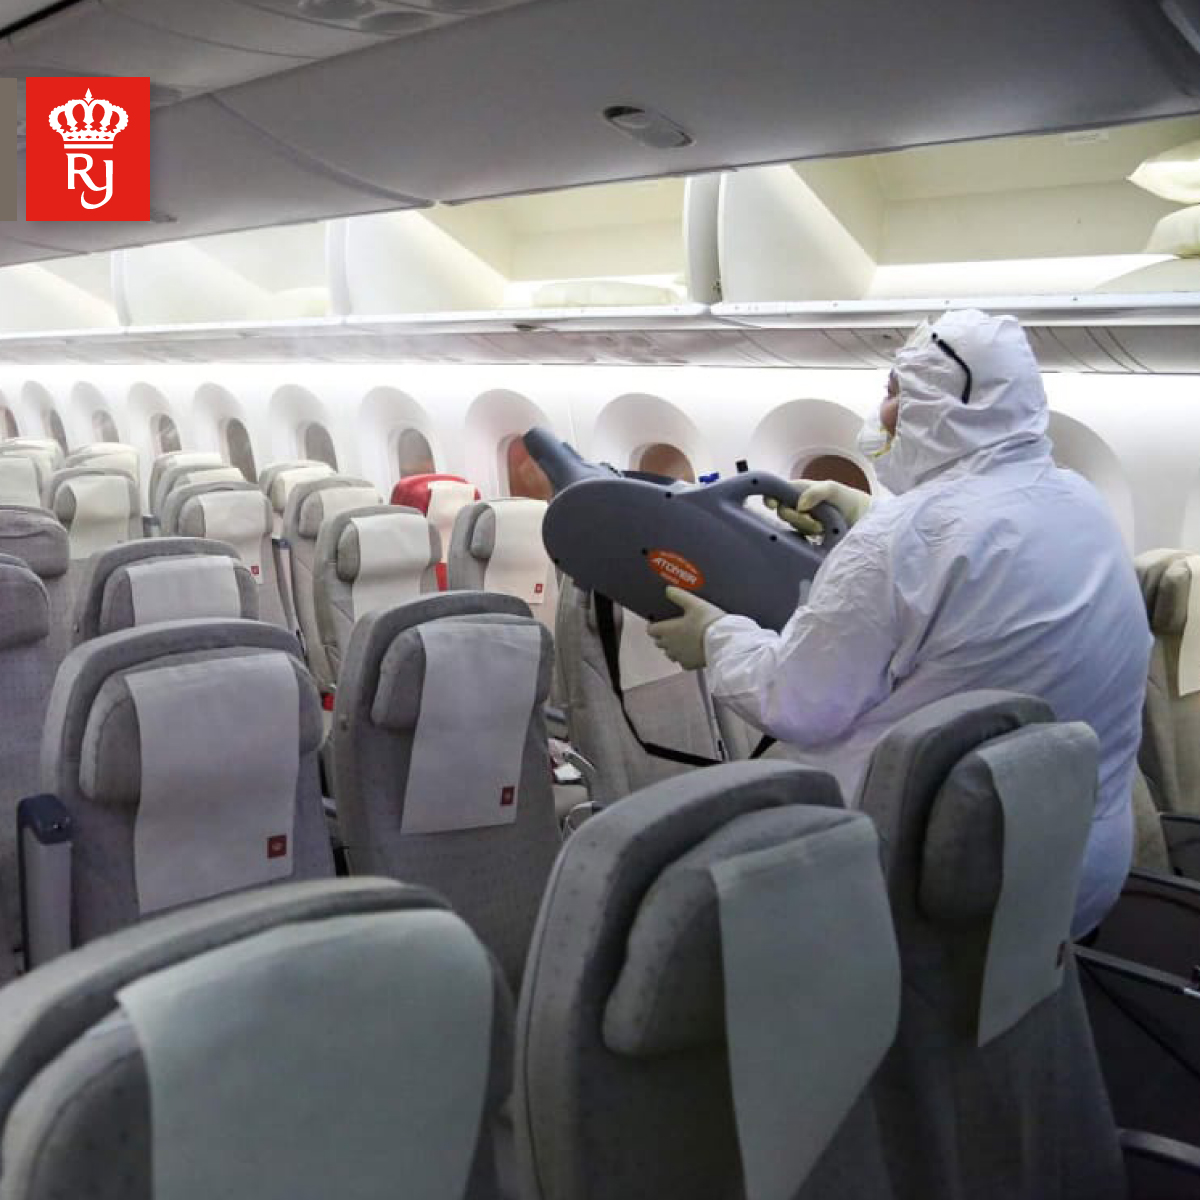 a person in a white suit and protective gear on an airplane